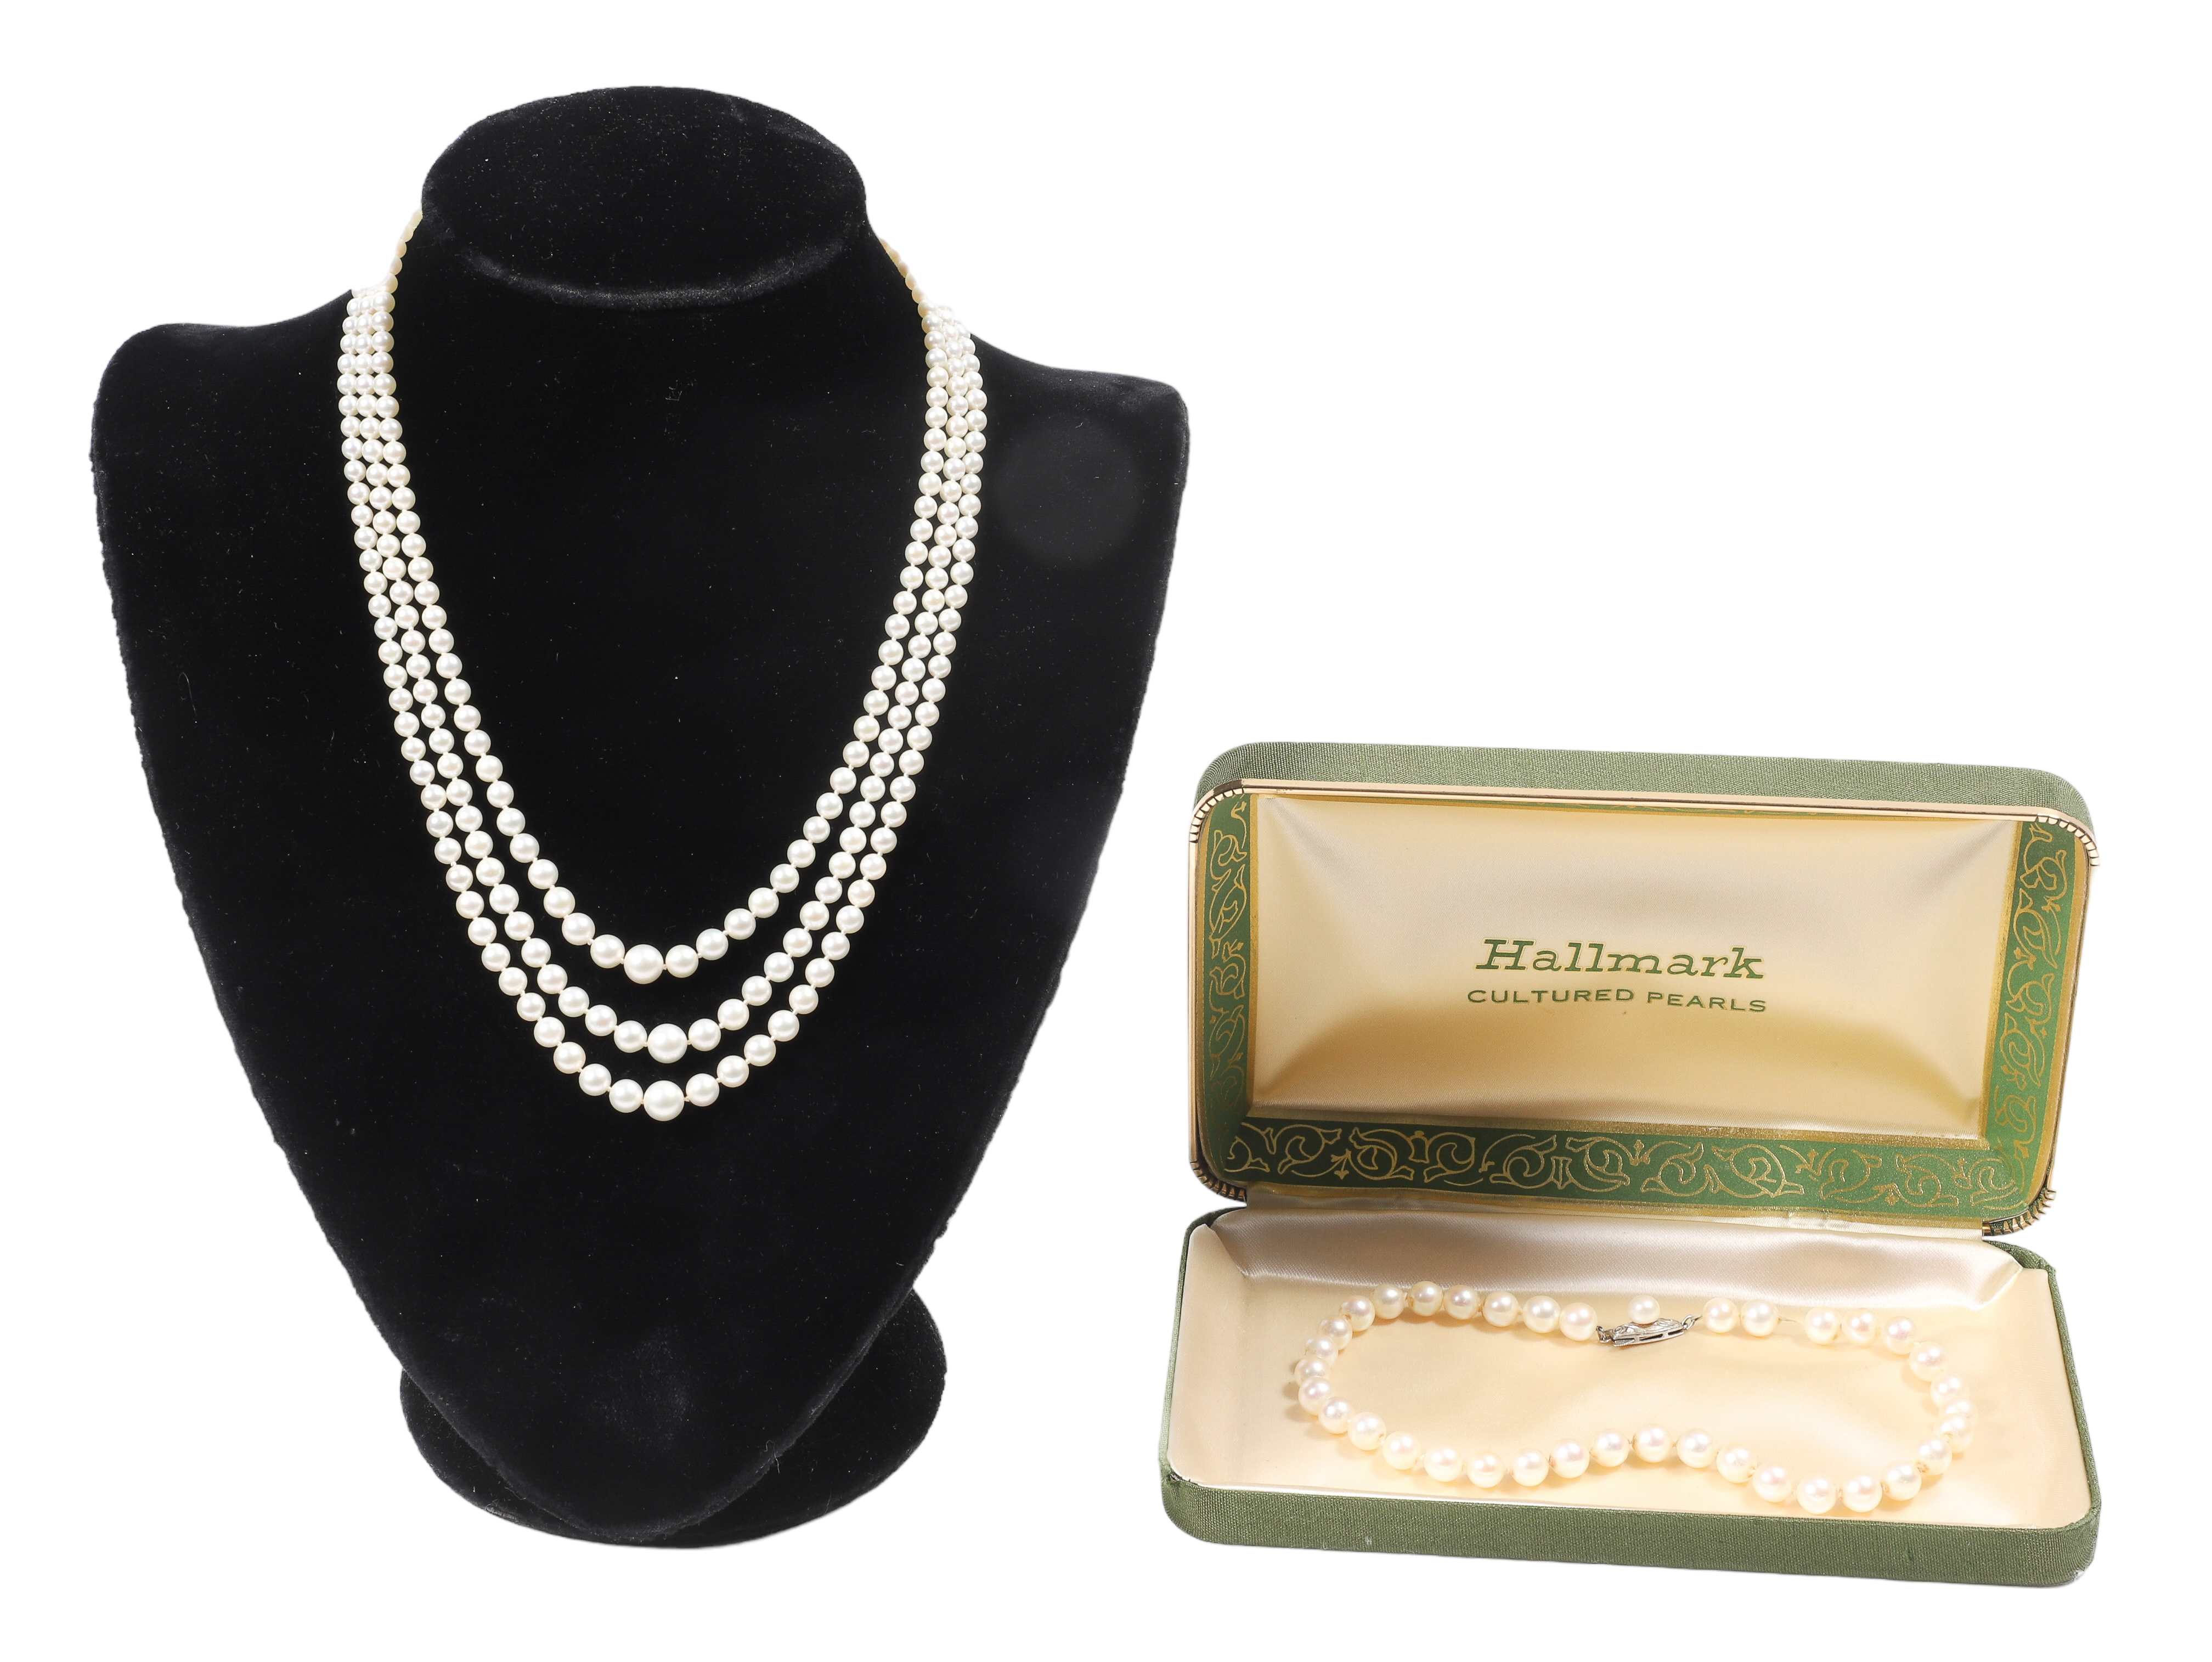  2 14K White gold and pearl necklaces 2e1a70